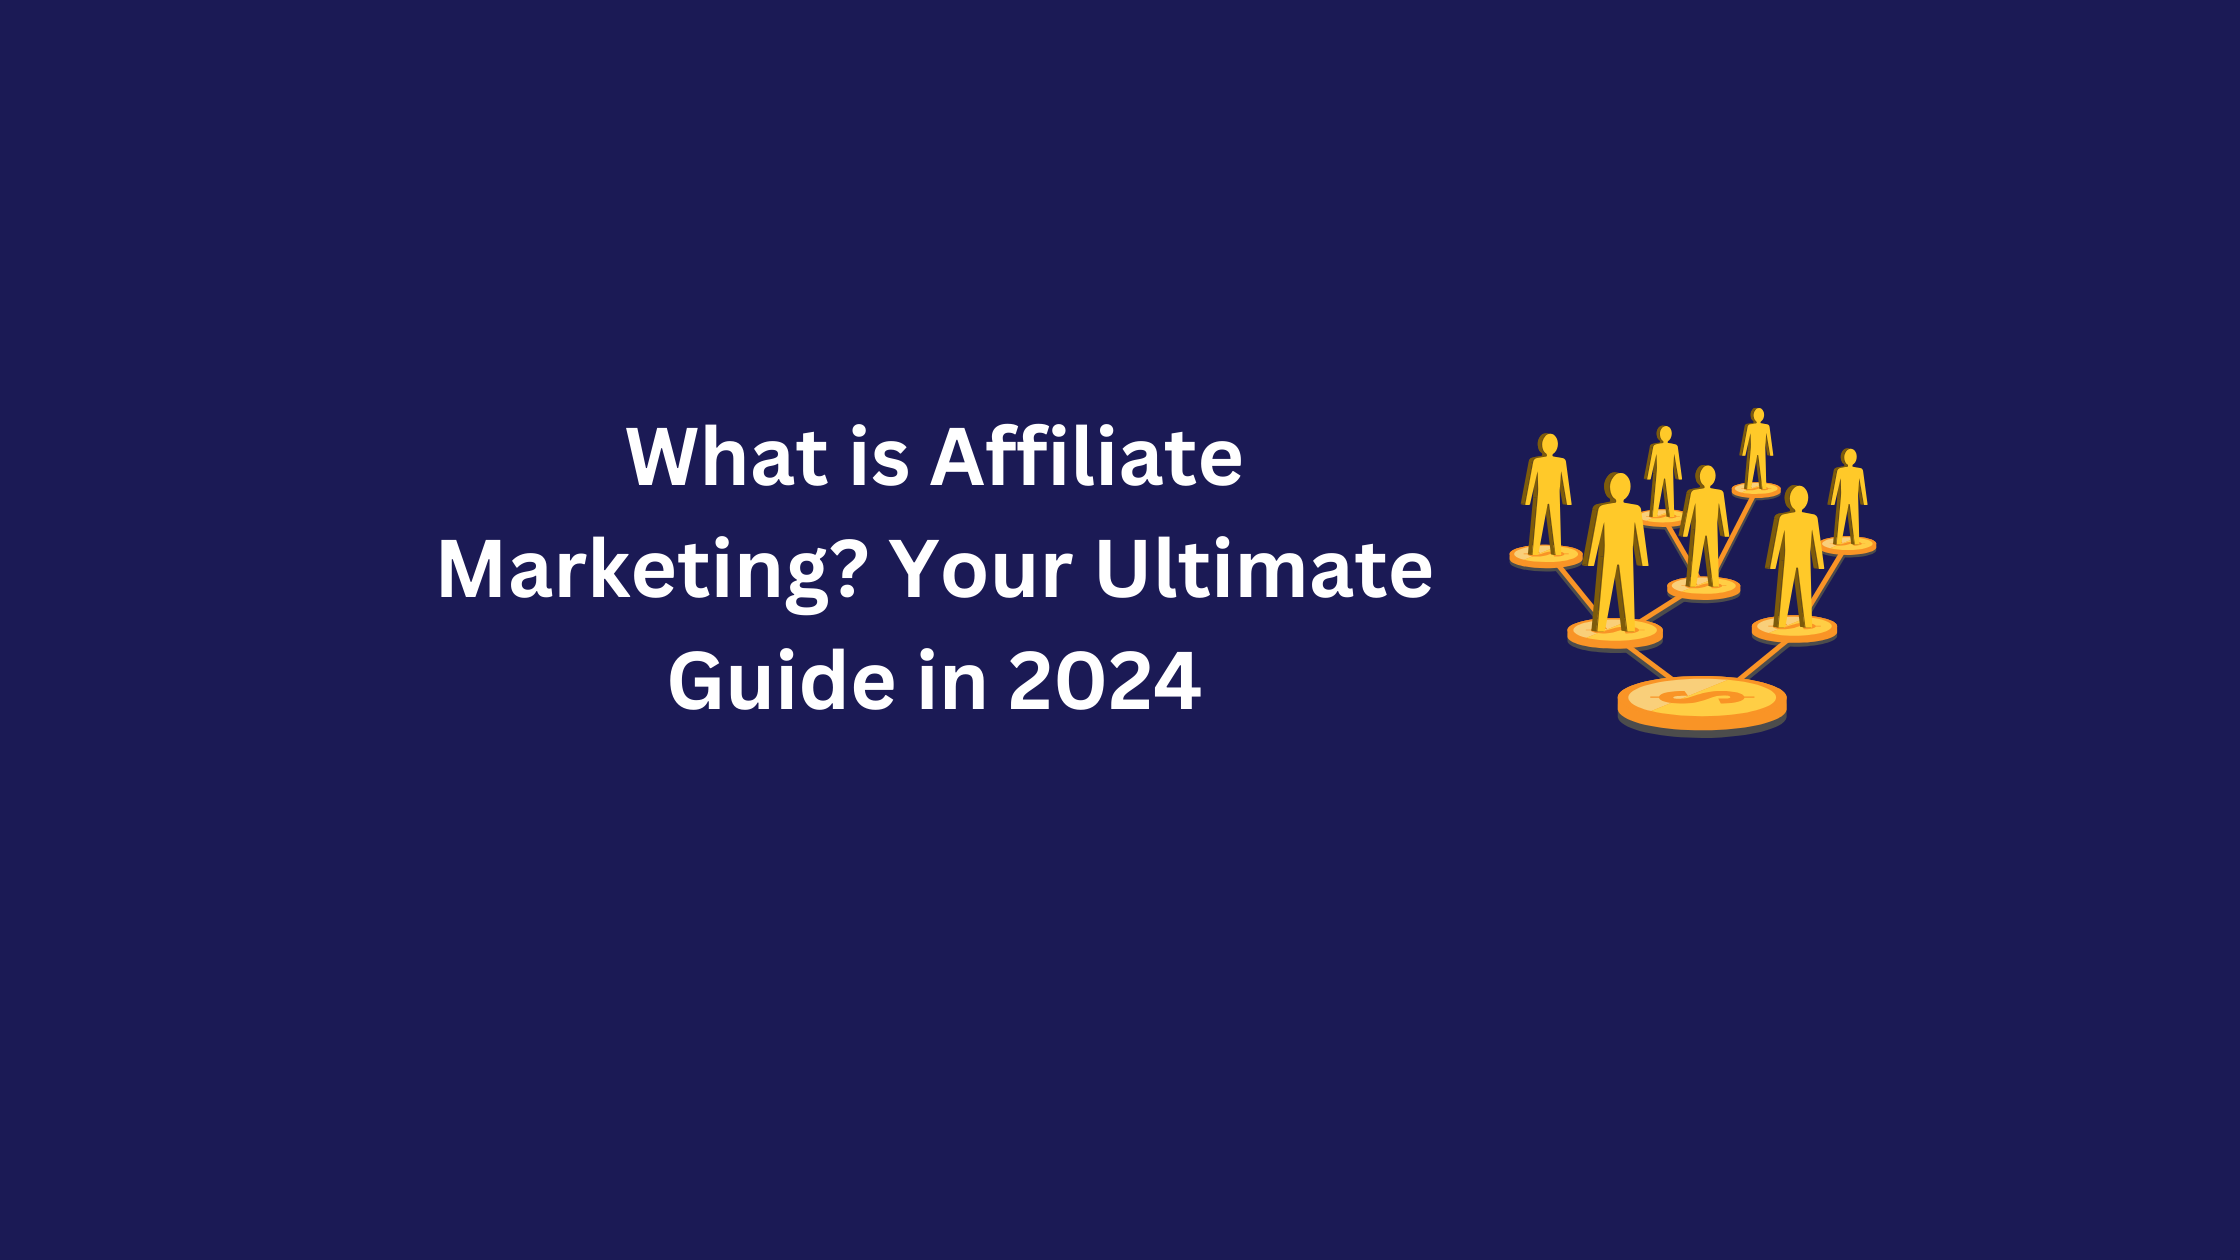 What is Affiliate Marketing? Your Ultimate Guide in 2024